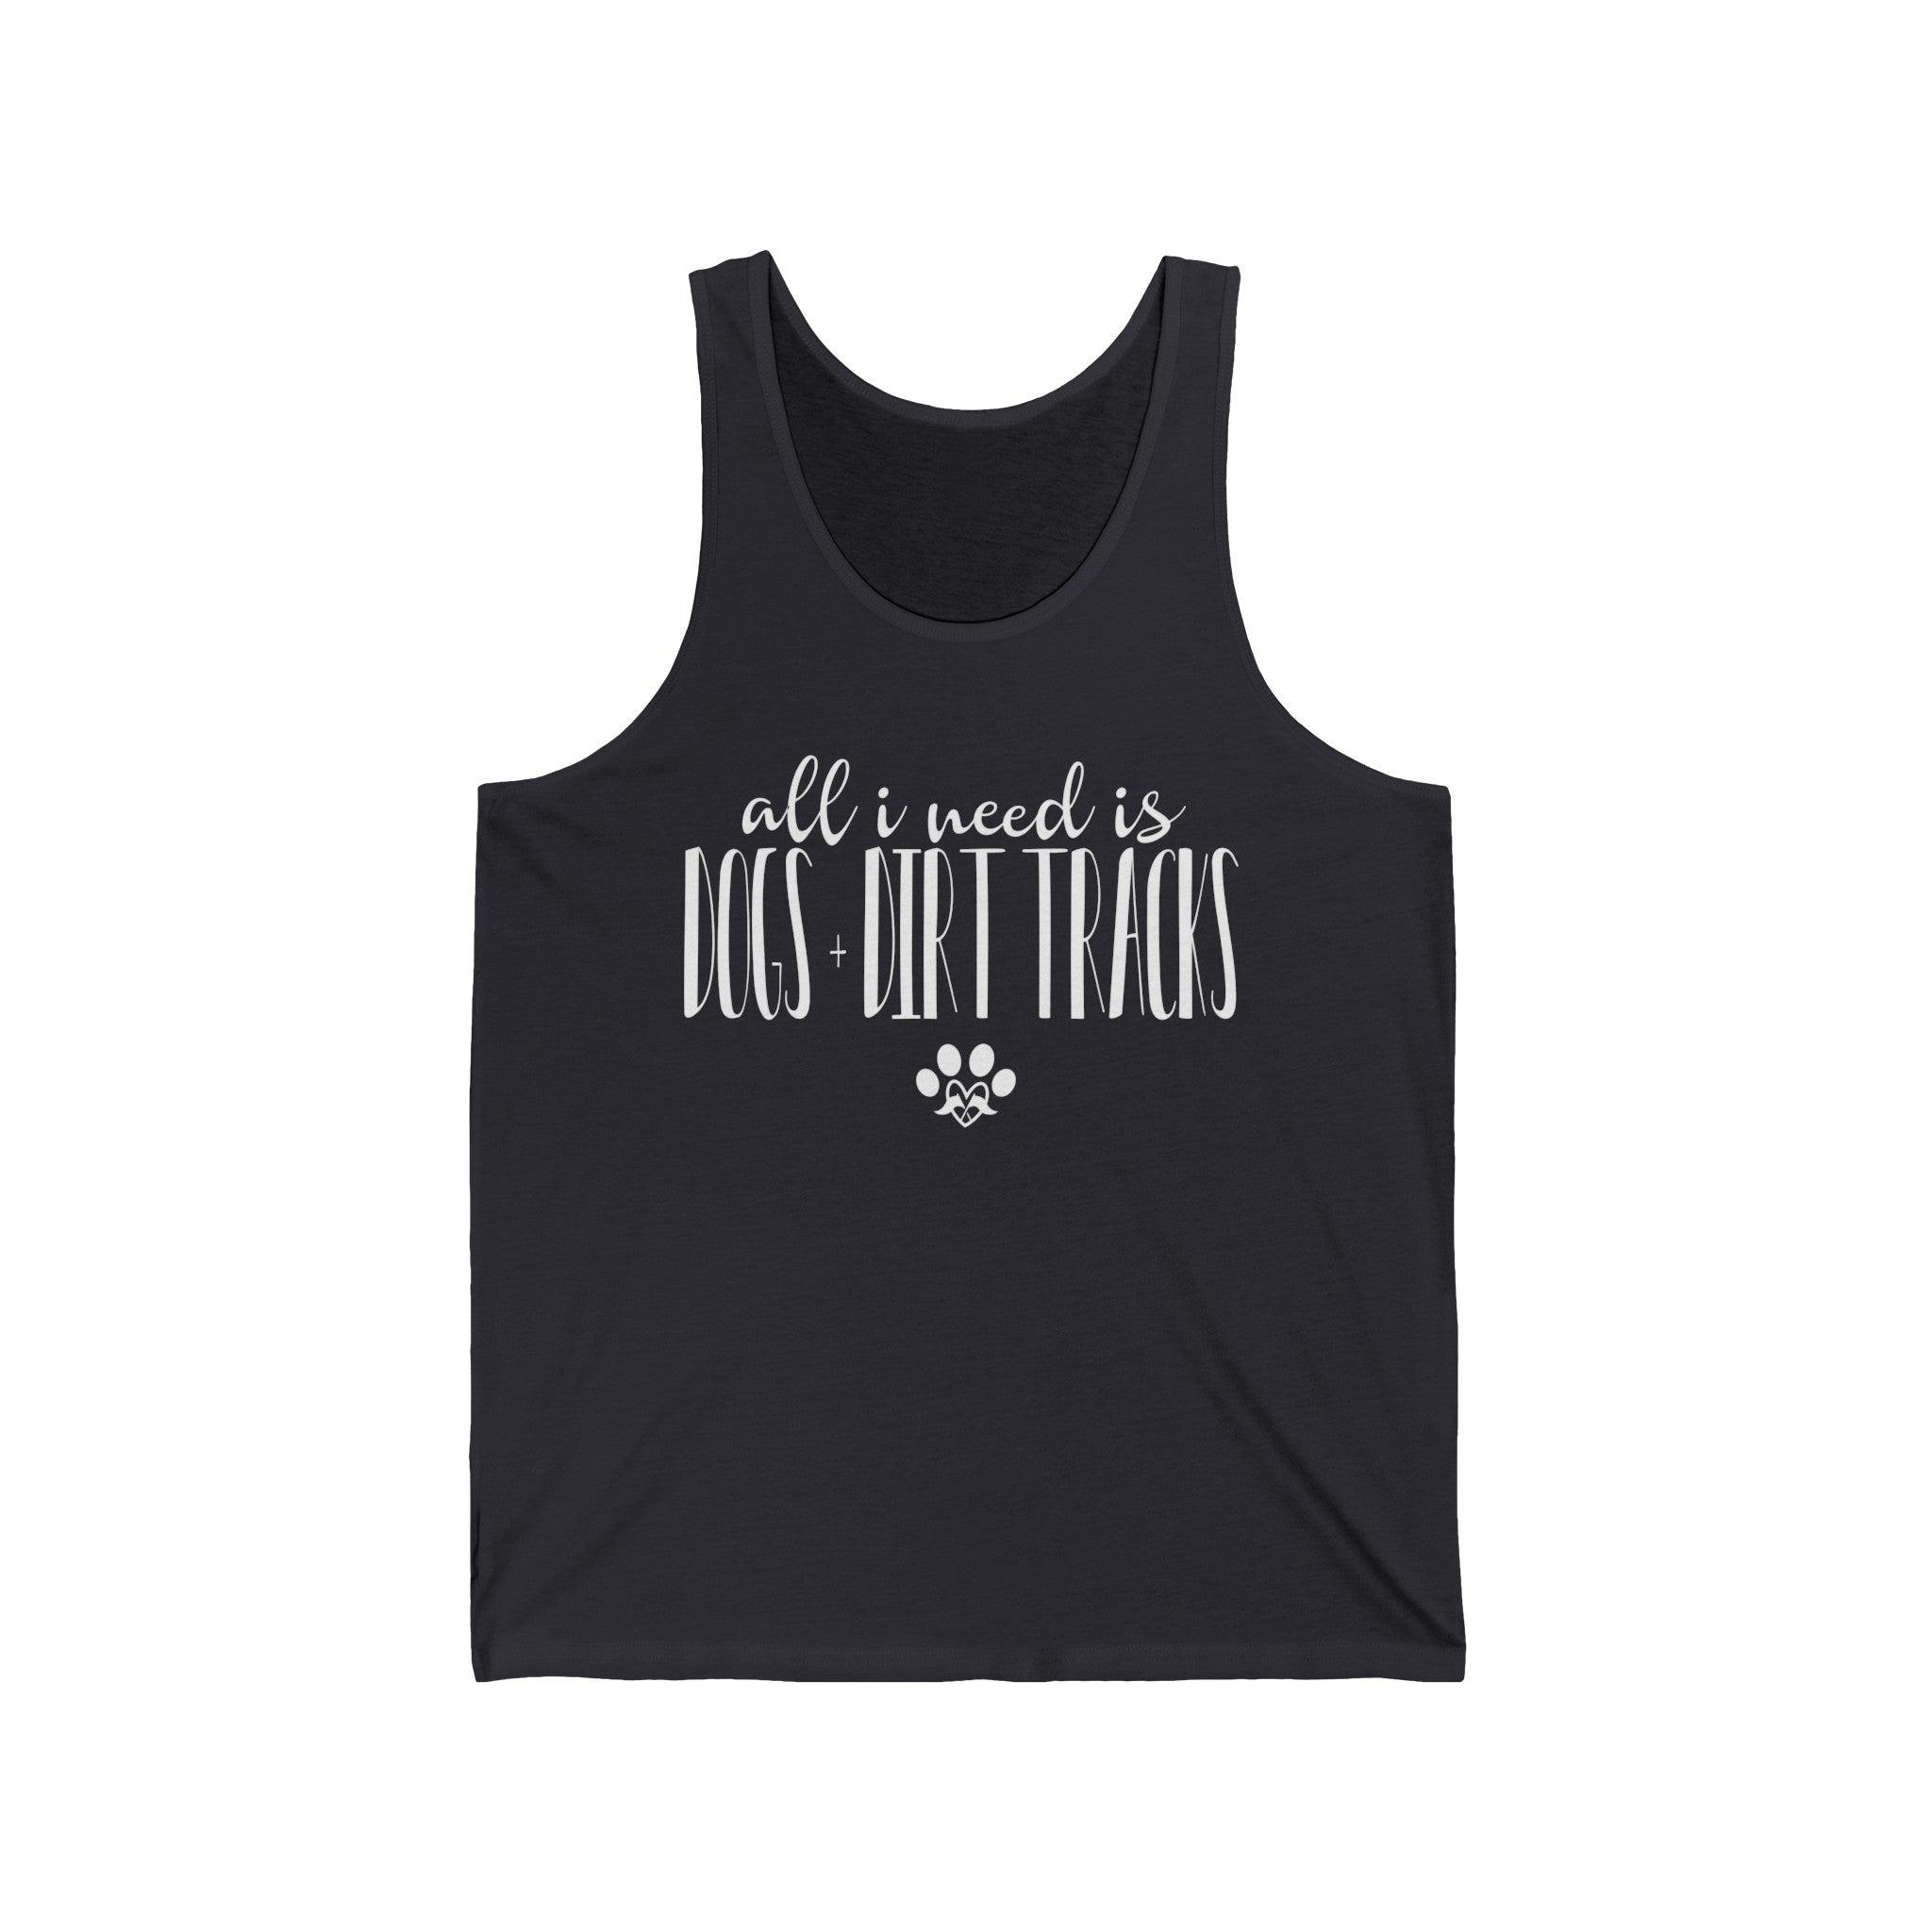 All I Need is Dogs + Dirt Tracks Unisex Tank Top for Summer Racedays